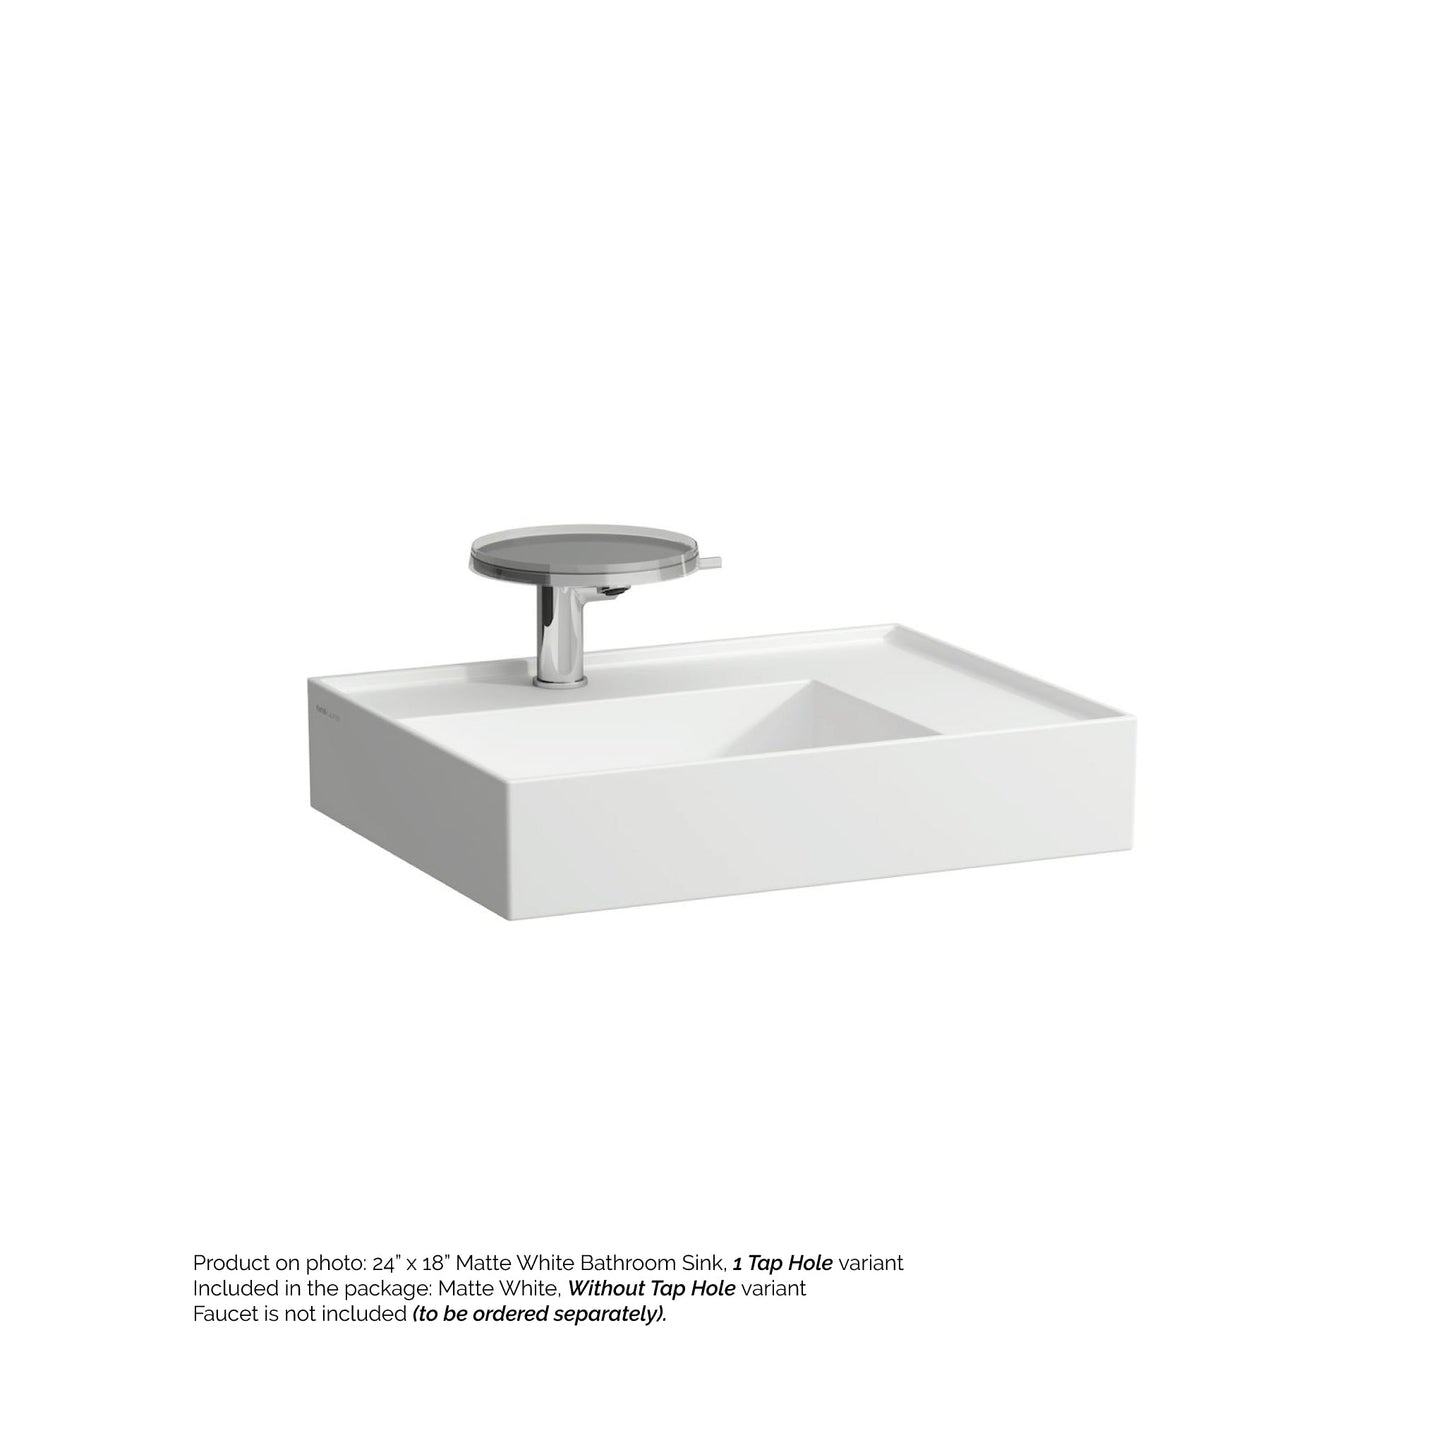 Laufen Kartell 24" x 18" Matte White Wall-Mounted Shelf-Right Bathroom Sink Without Faucet Hole